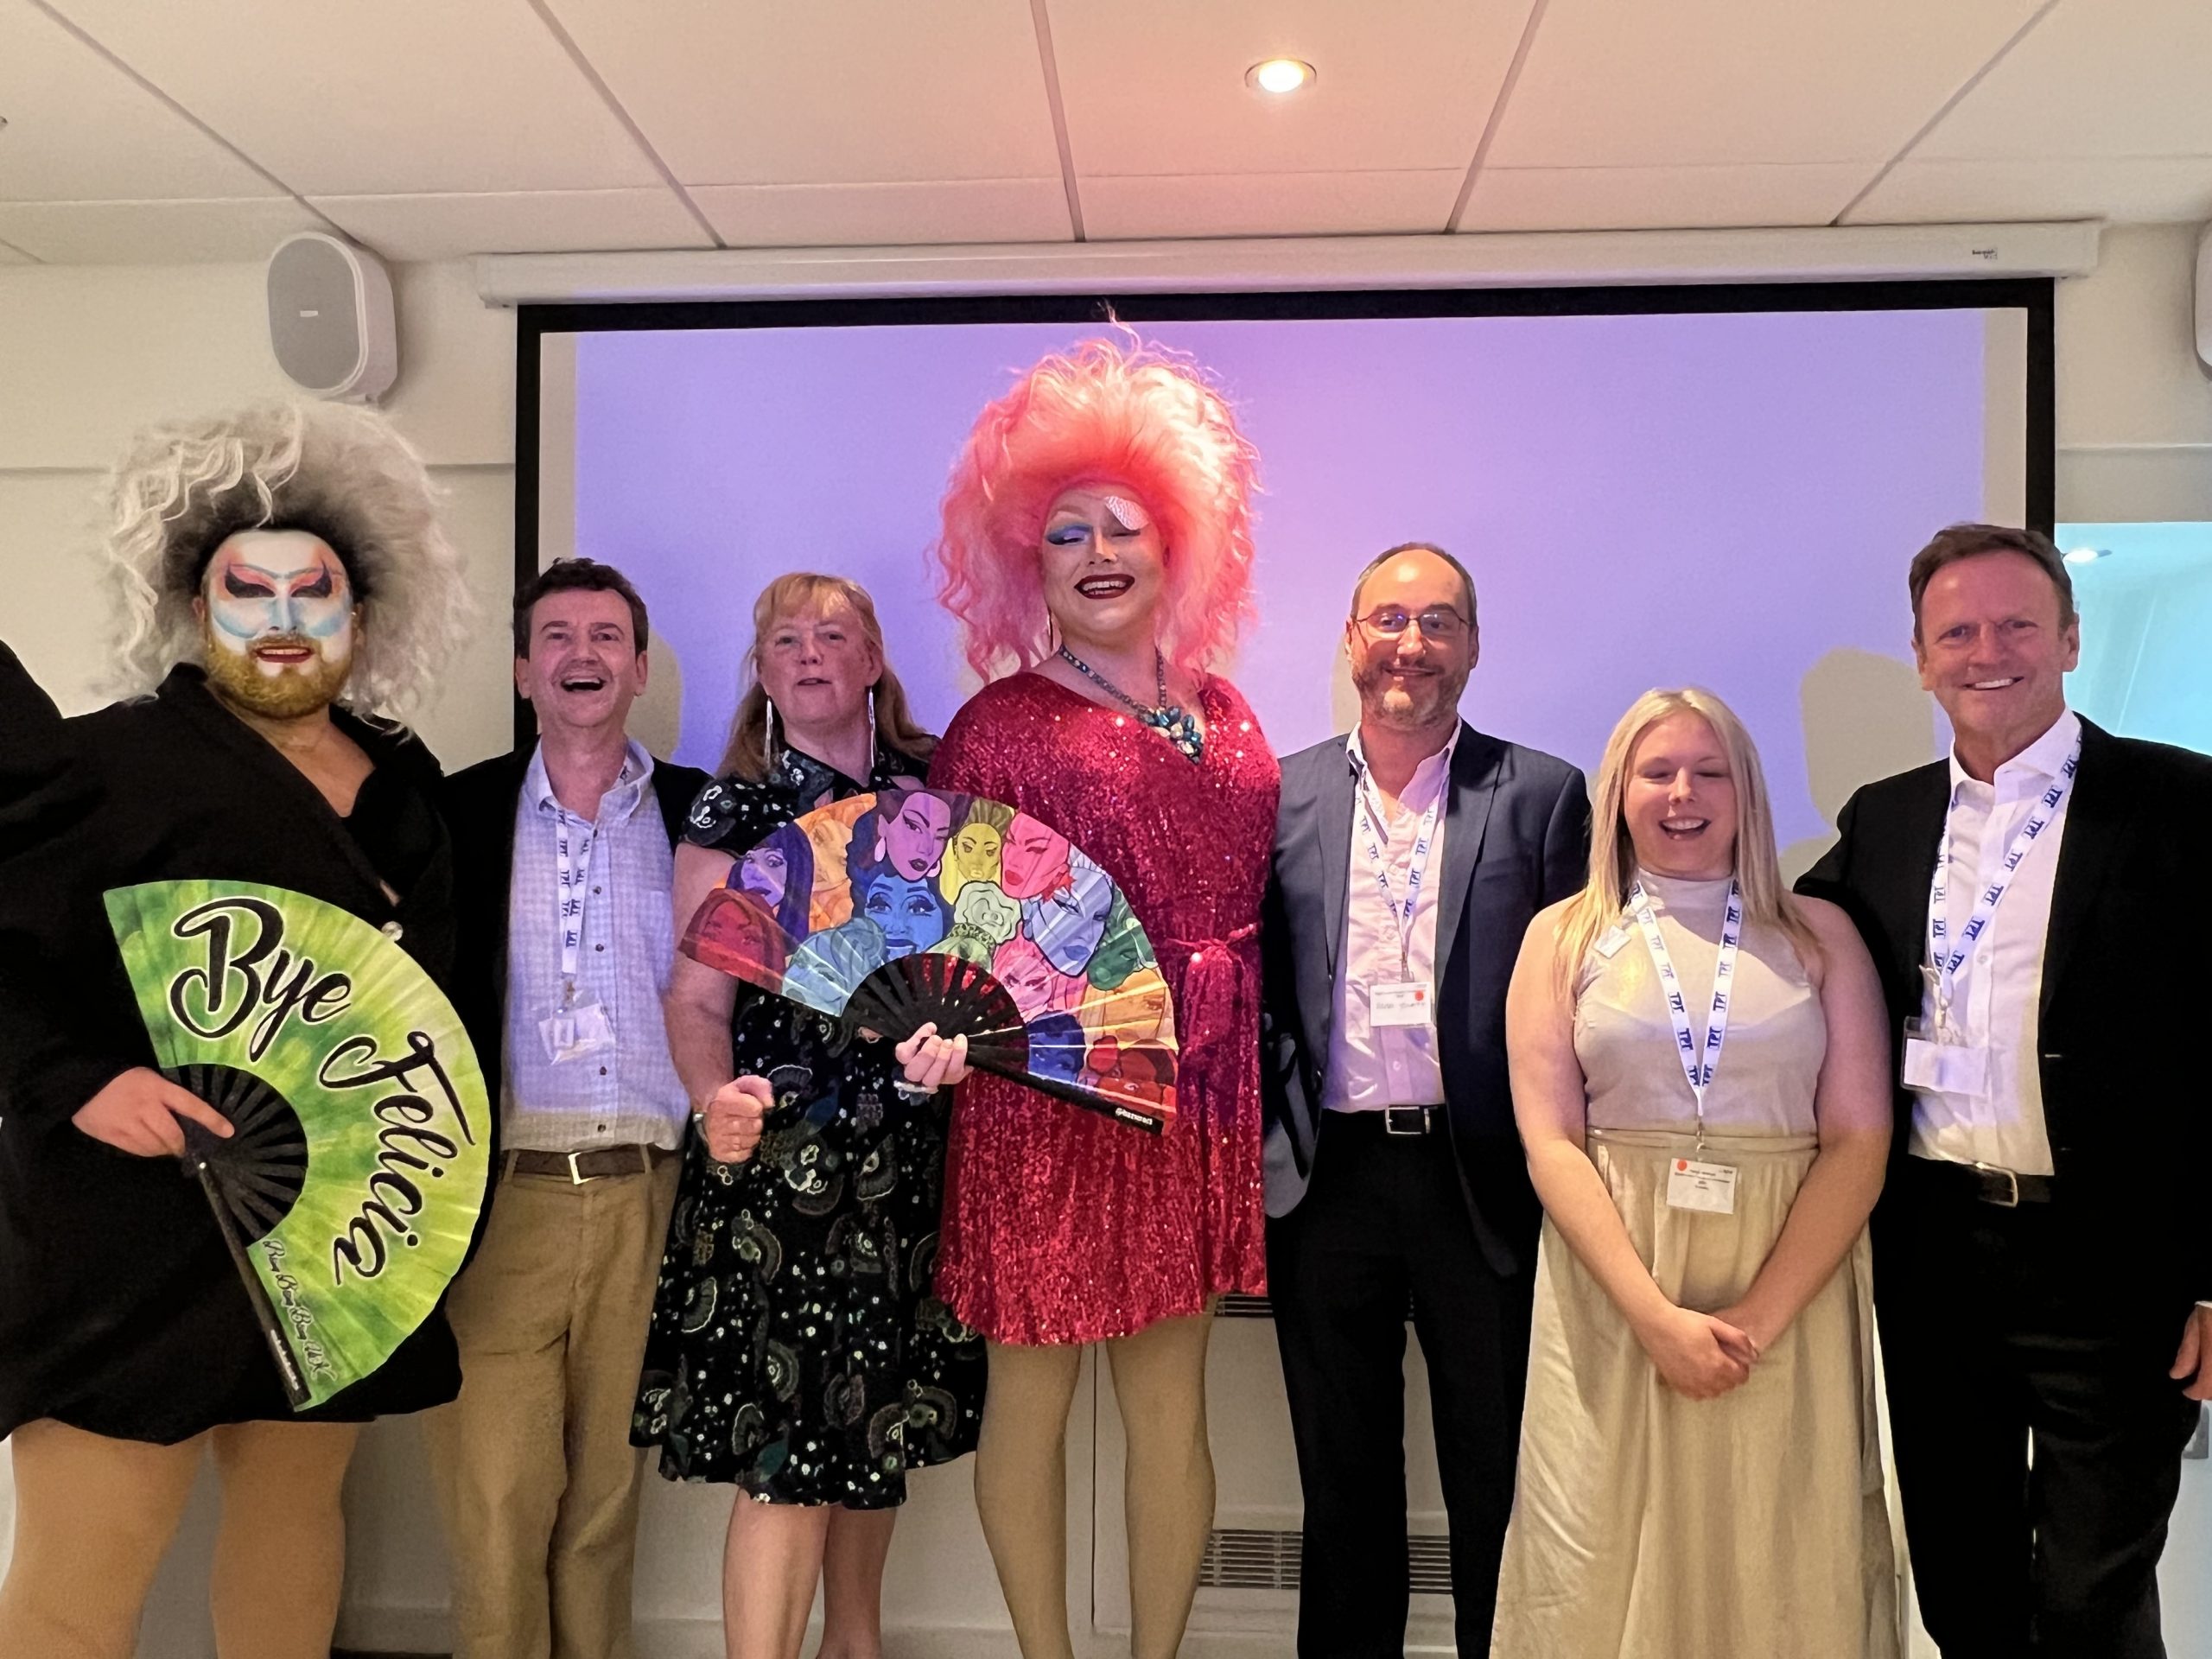 From left to right: Mel Teaser, Charles Colquhoun, CEO of TPT, Tricia Sail, Venetia Blind, and TPT Trustees, Adam Youatt, Helen Mitchell, and Mervyn Williamson.